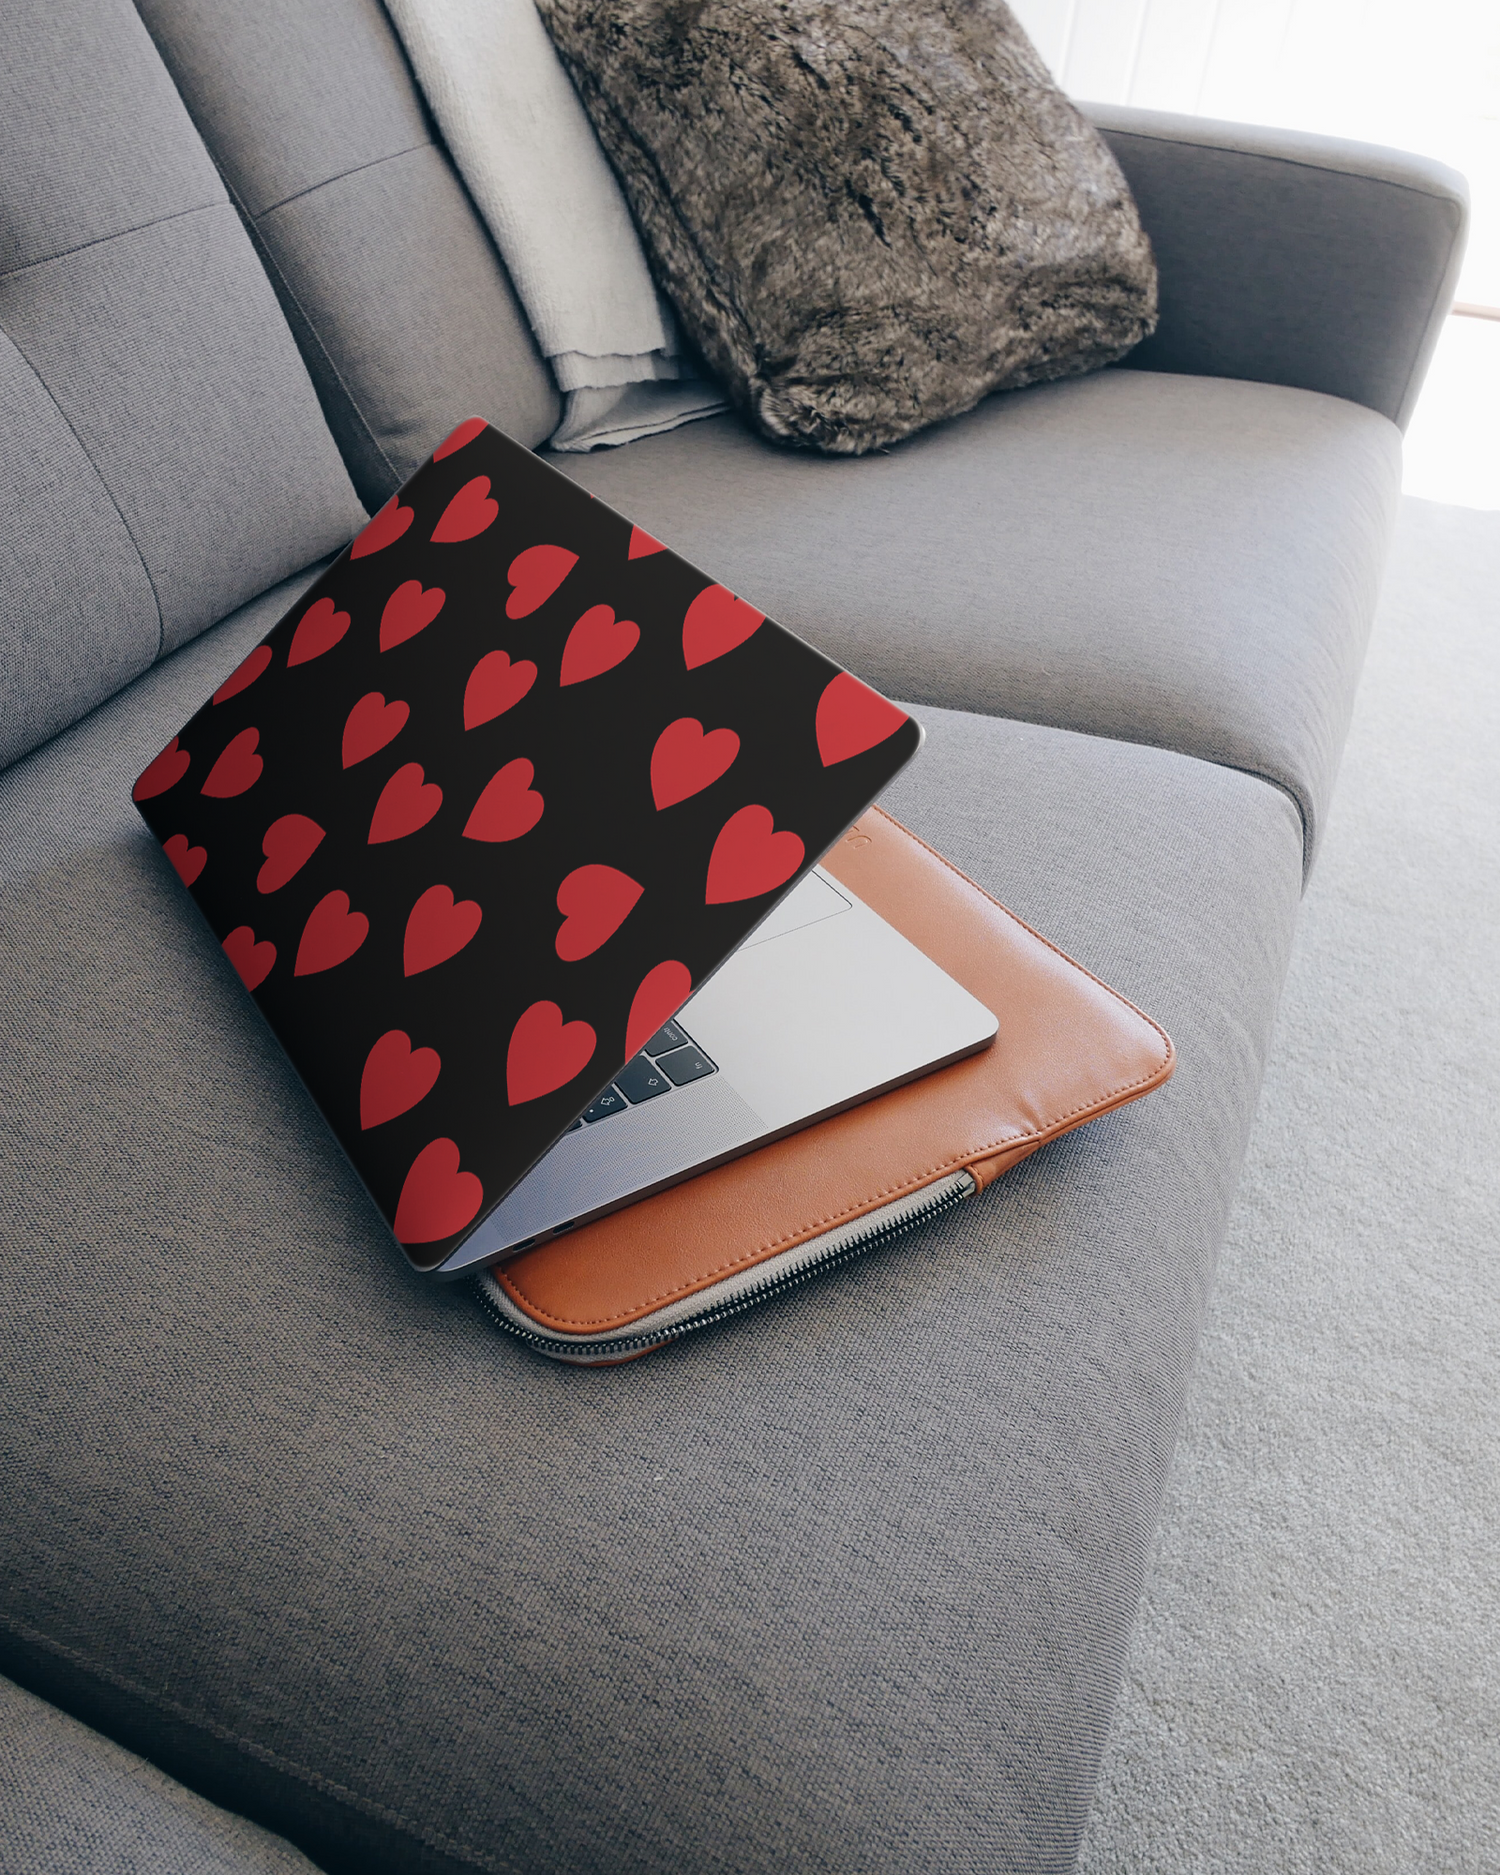 Repeating Hearts Laptop Skin for 15 inch Apple MacBooks on a couch